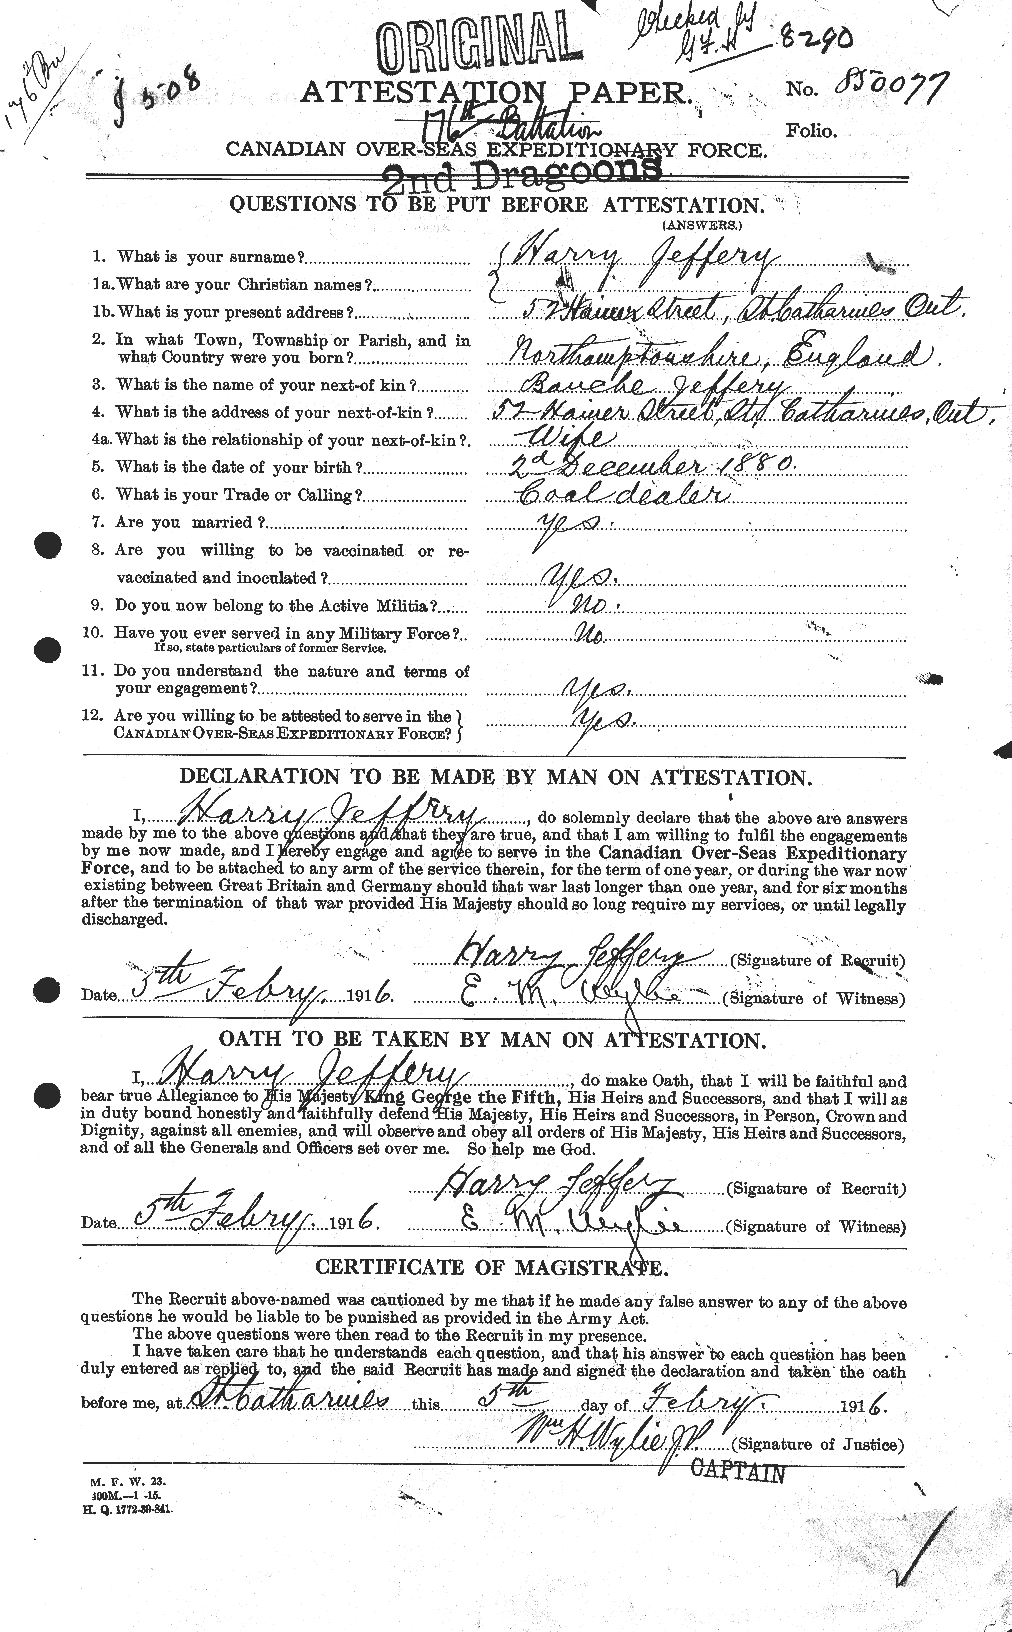 Personnel Records of the First World War - CEF 417759a